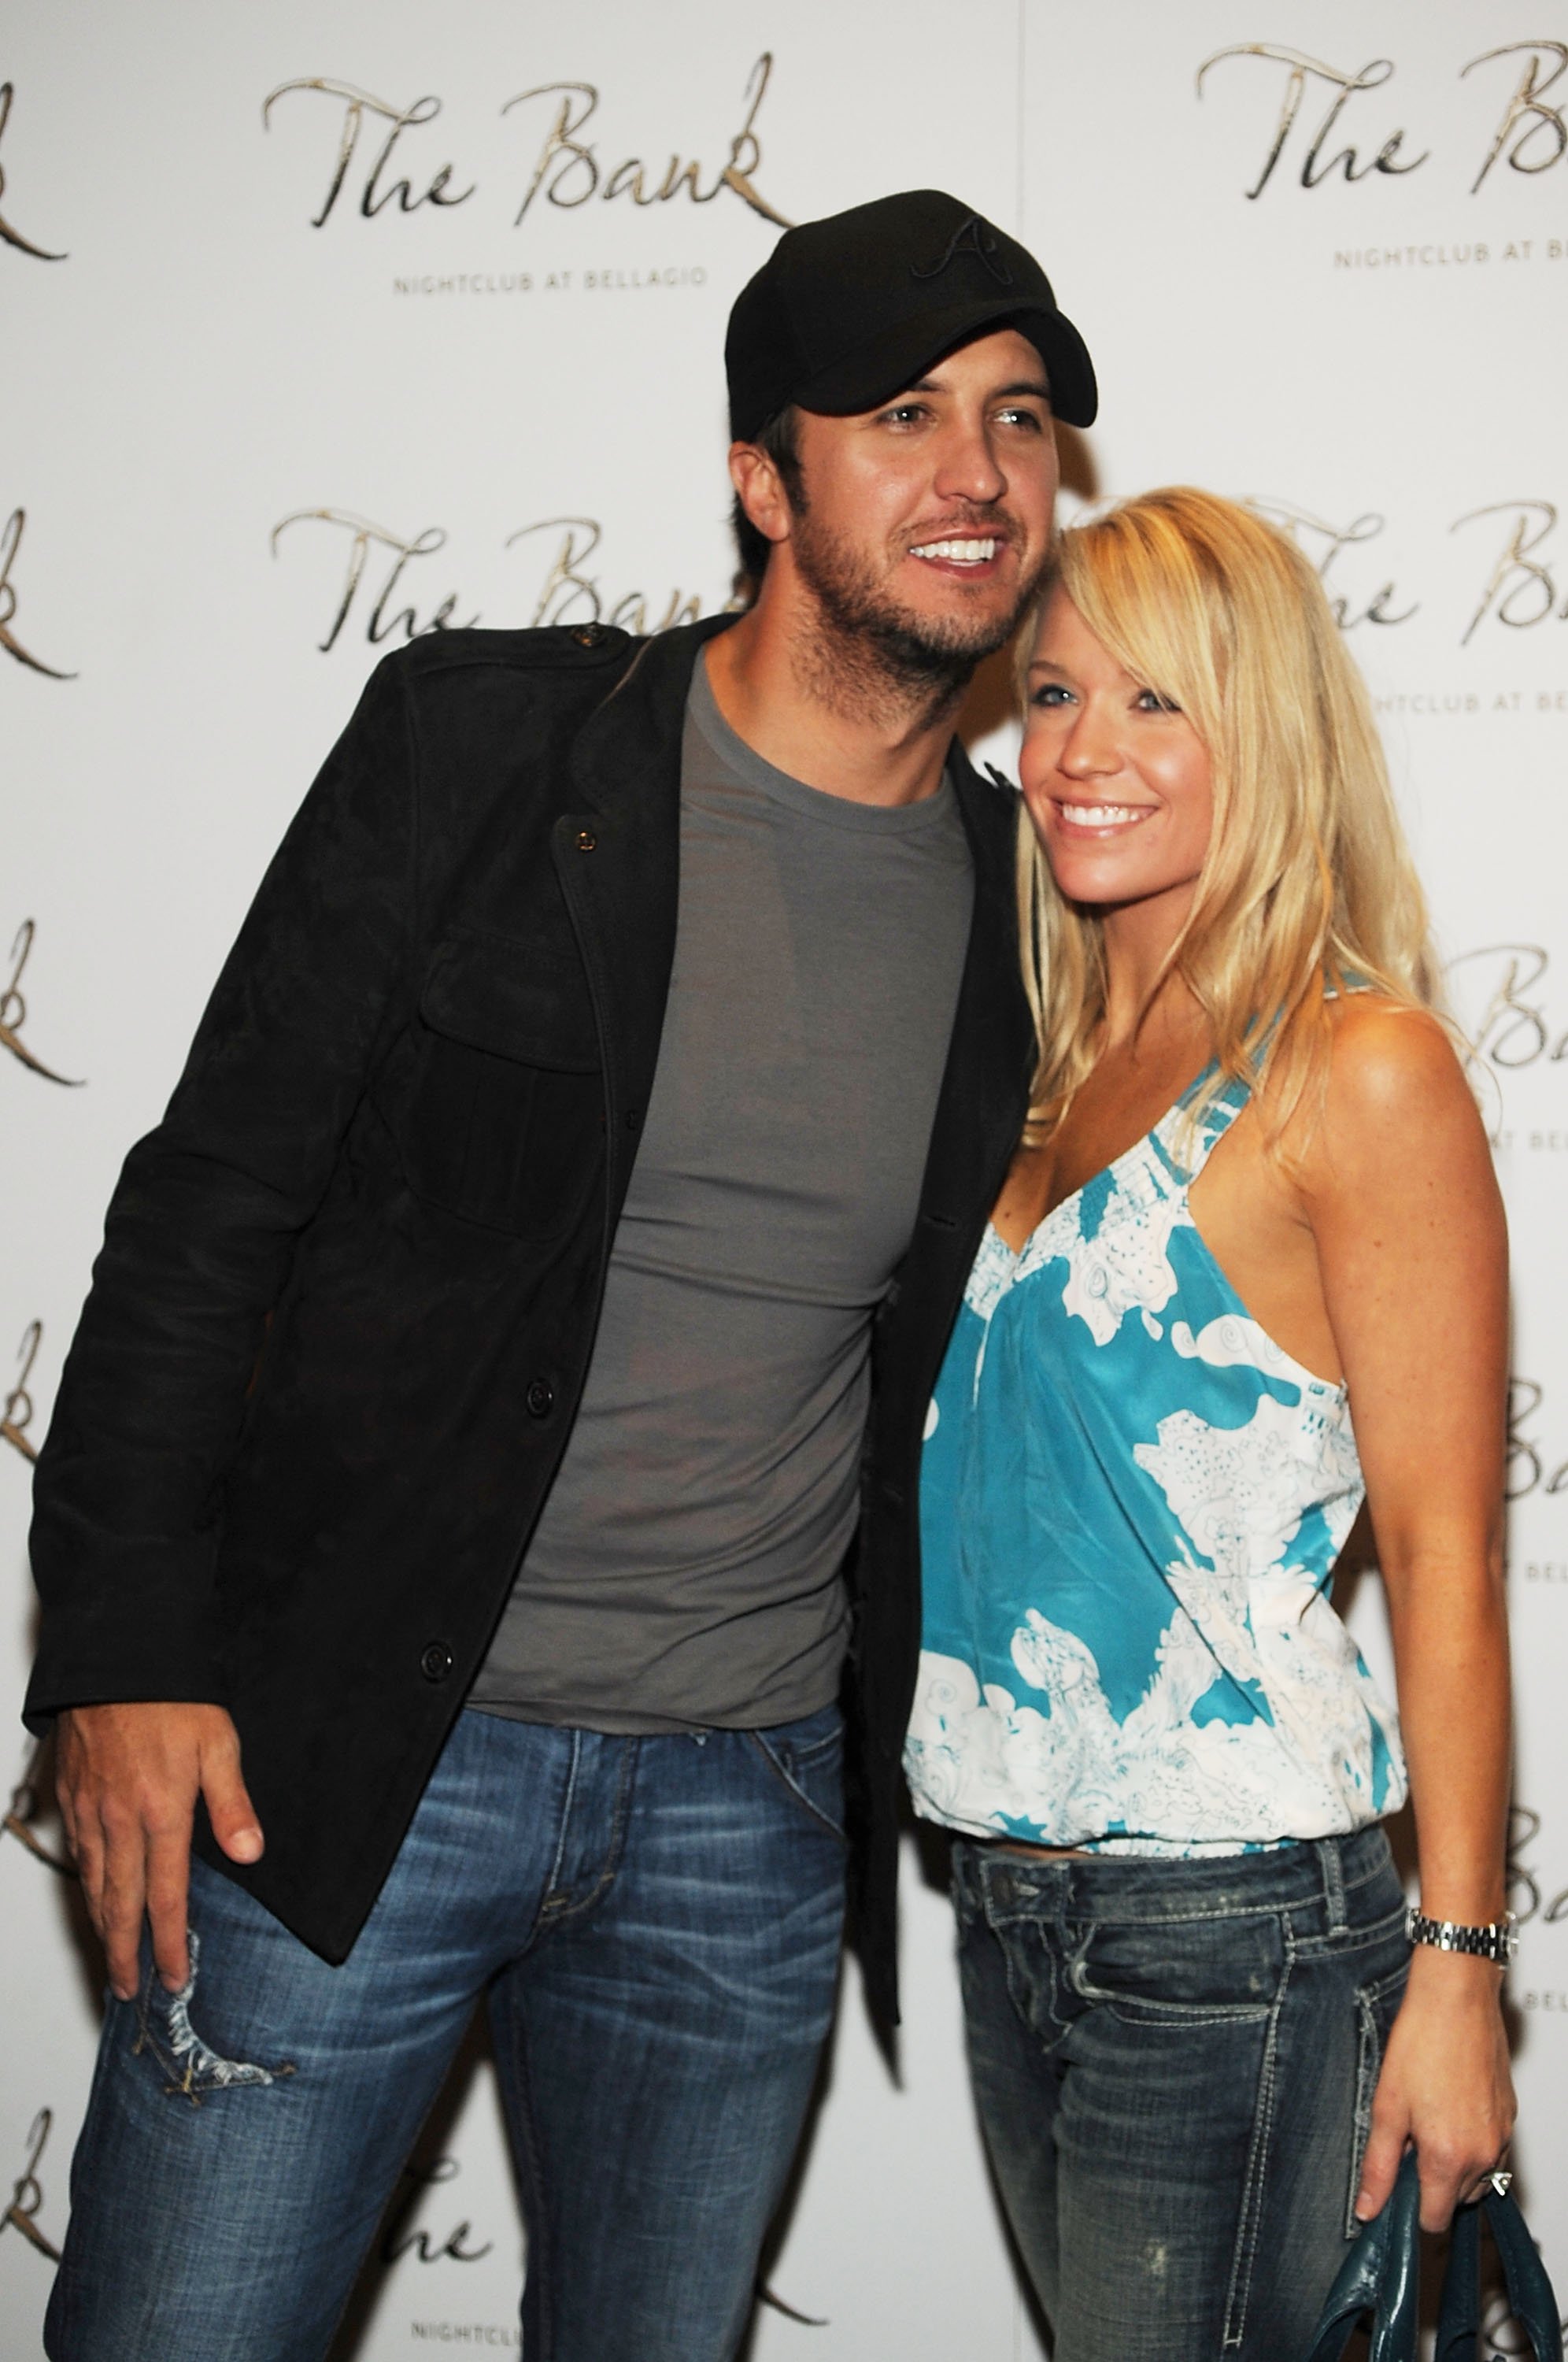 Luke Bryan and his wife Caroline Bryan arriving at The Bank Nightclub at The Bellagio Hotel and Casino Resort on April 3, 2009 in Las Vegas, Nevada. / Source: Getty Images